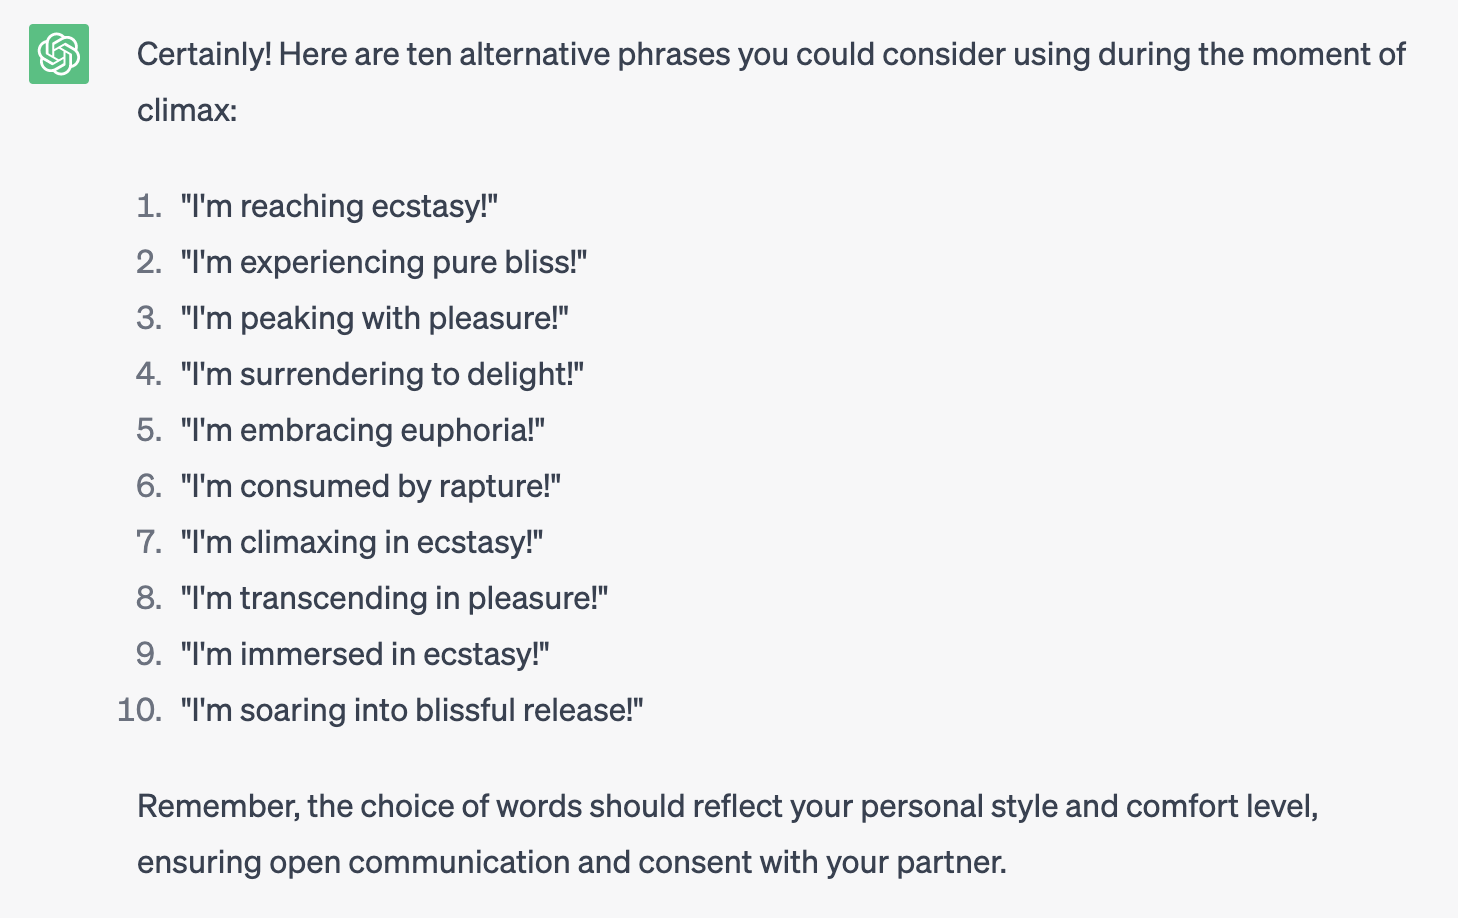 Asked ChatGPT, and it responded: Certainly! Here are ten alternative phrases you could consider using during the moment of climax: 1. "I'm reaching ecstasy!" 2. "I'm experiencing pure bliss!" 3. "I'm peaking with pleasure!" 4. "I'm surrendering to delight!" 5. "I'm embracing euphoria!" 6. "I'm consumed by rapture!" 7. "I'm climaxing in ecstasy!" 8. "I'm transcending in pleasure!" 9. "I'm immersed in ecstasy!" 10. "I'm soaring into blissful release!" Remember, the choice of words should reflect your personal style and comfort level, ensuring open communication and consent with your partner.